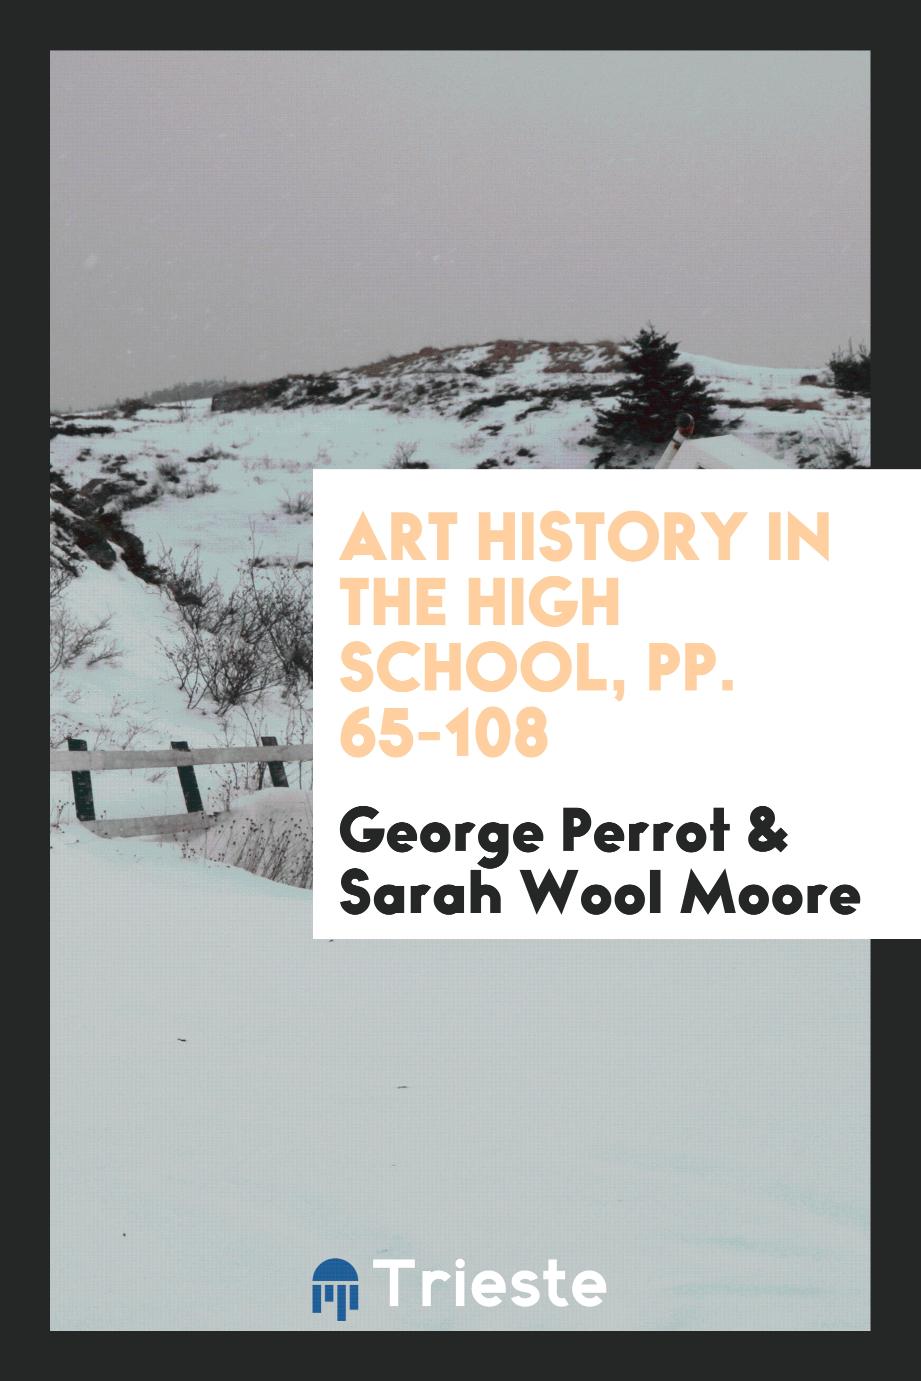 Art history in the high school, pp. 65-108